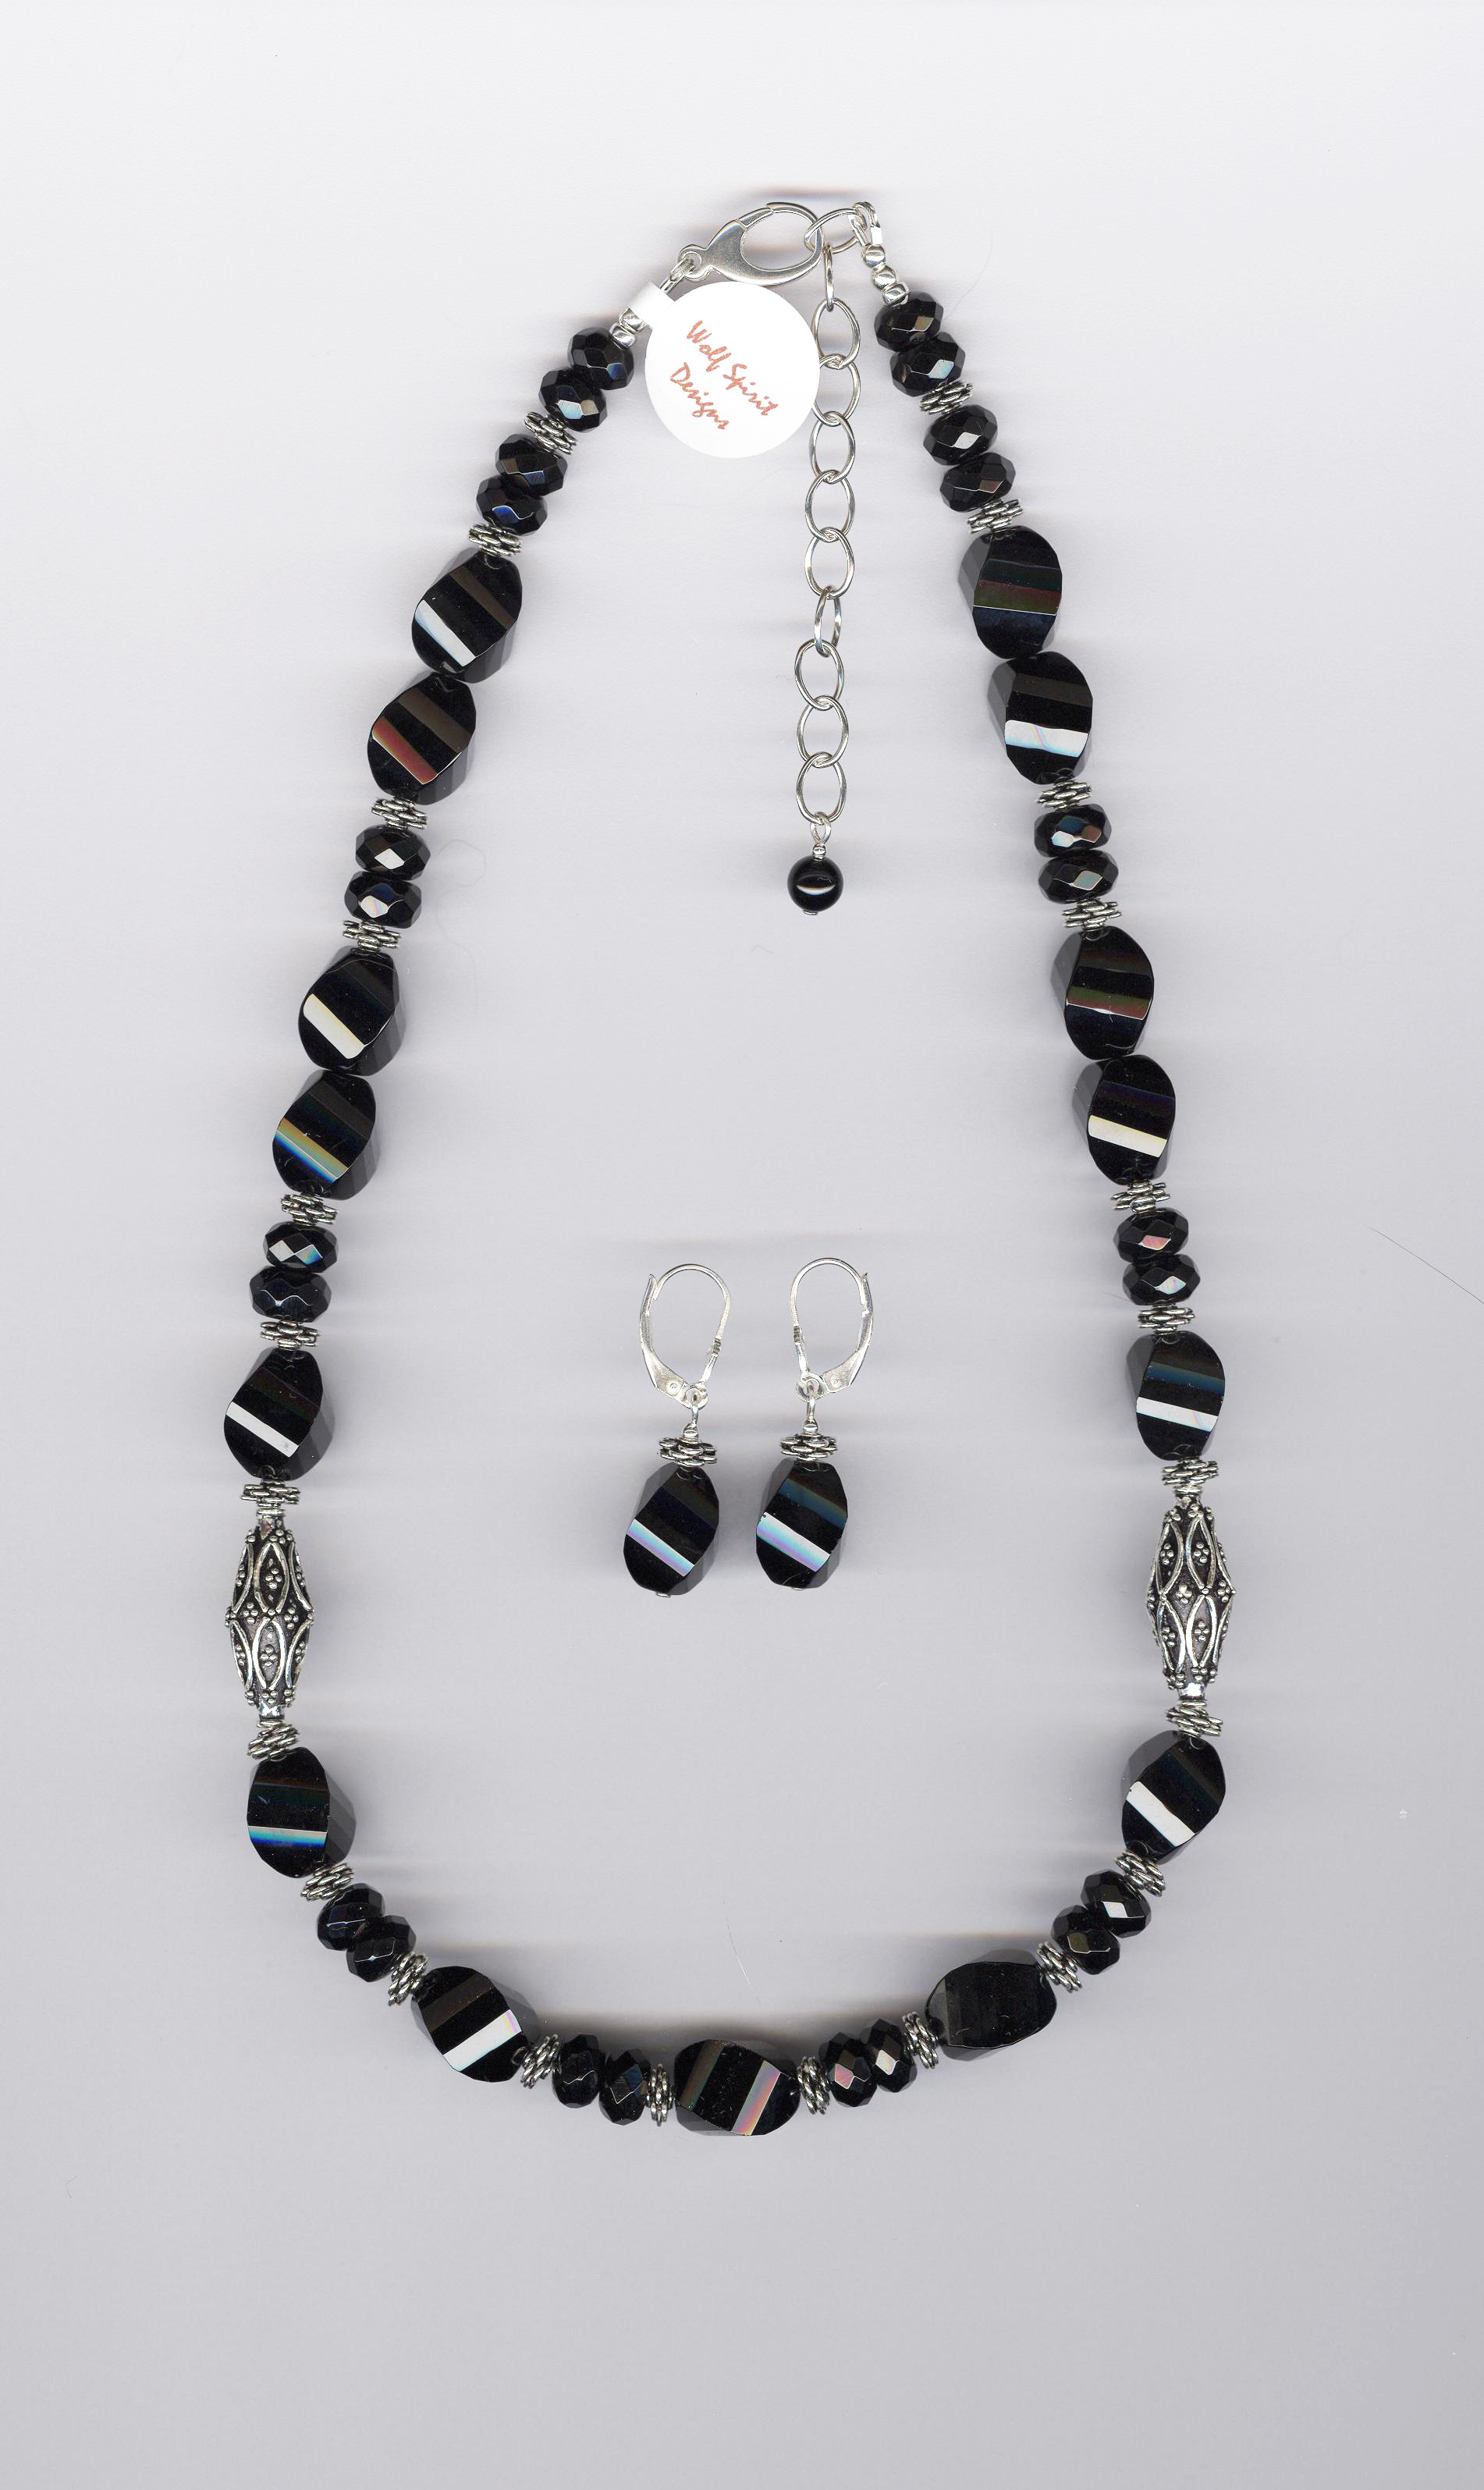 Black Onyx and Bali Silver Necklace